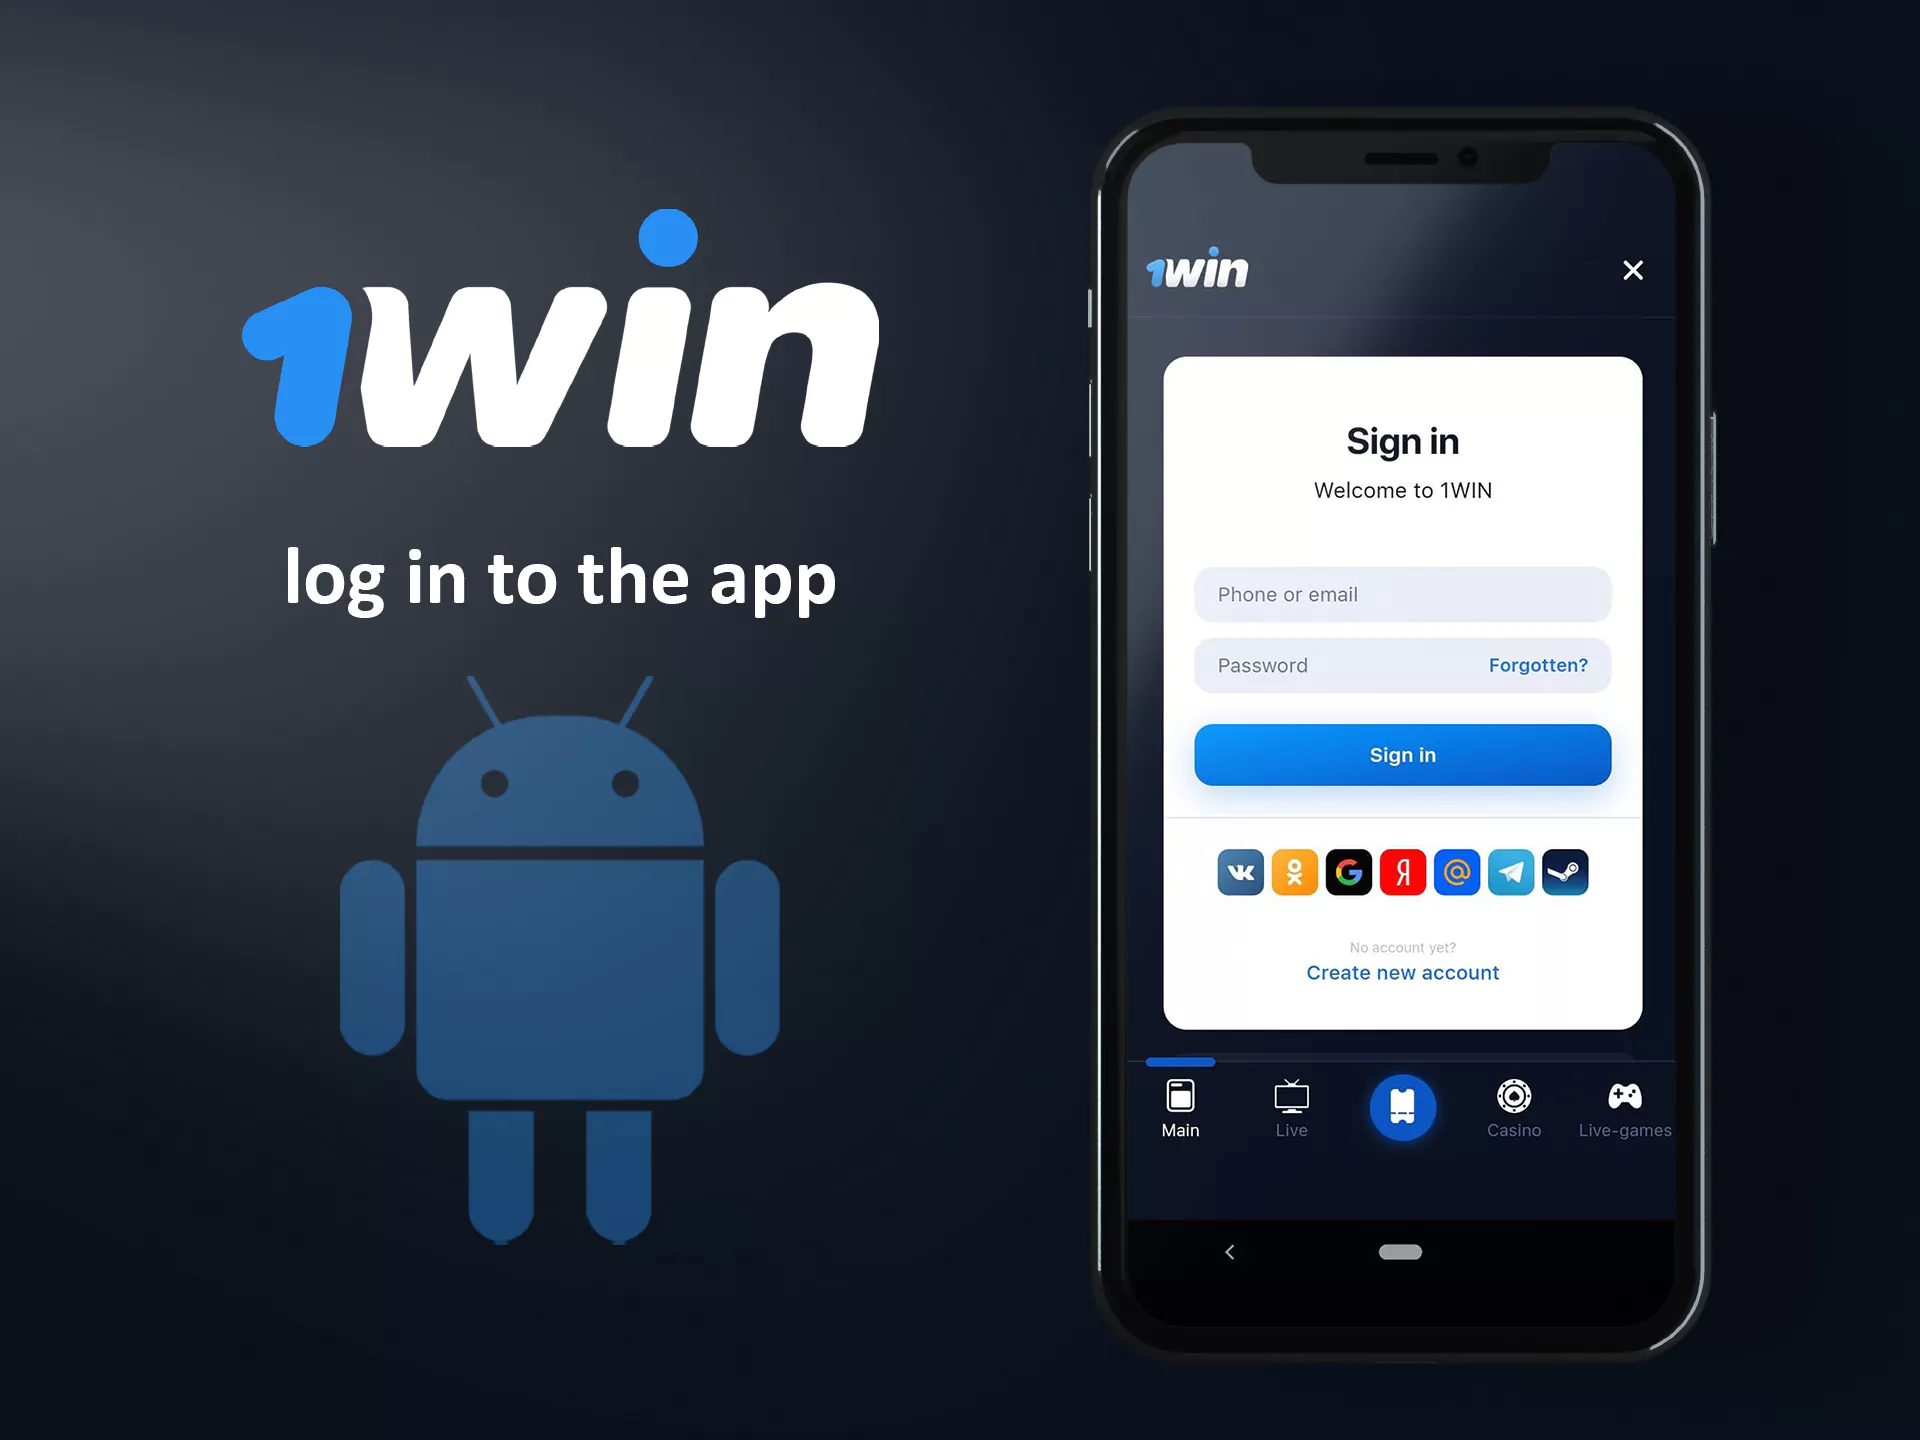 Run the app and log in to your account.